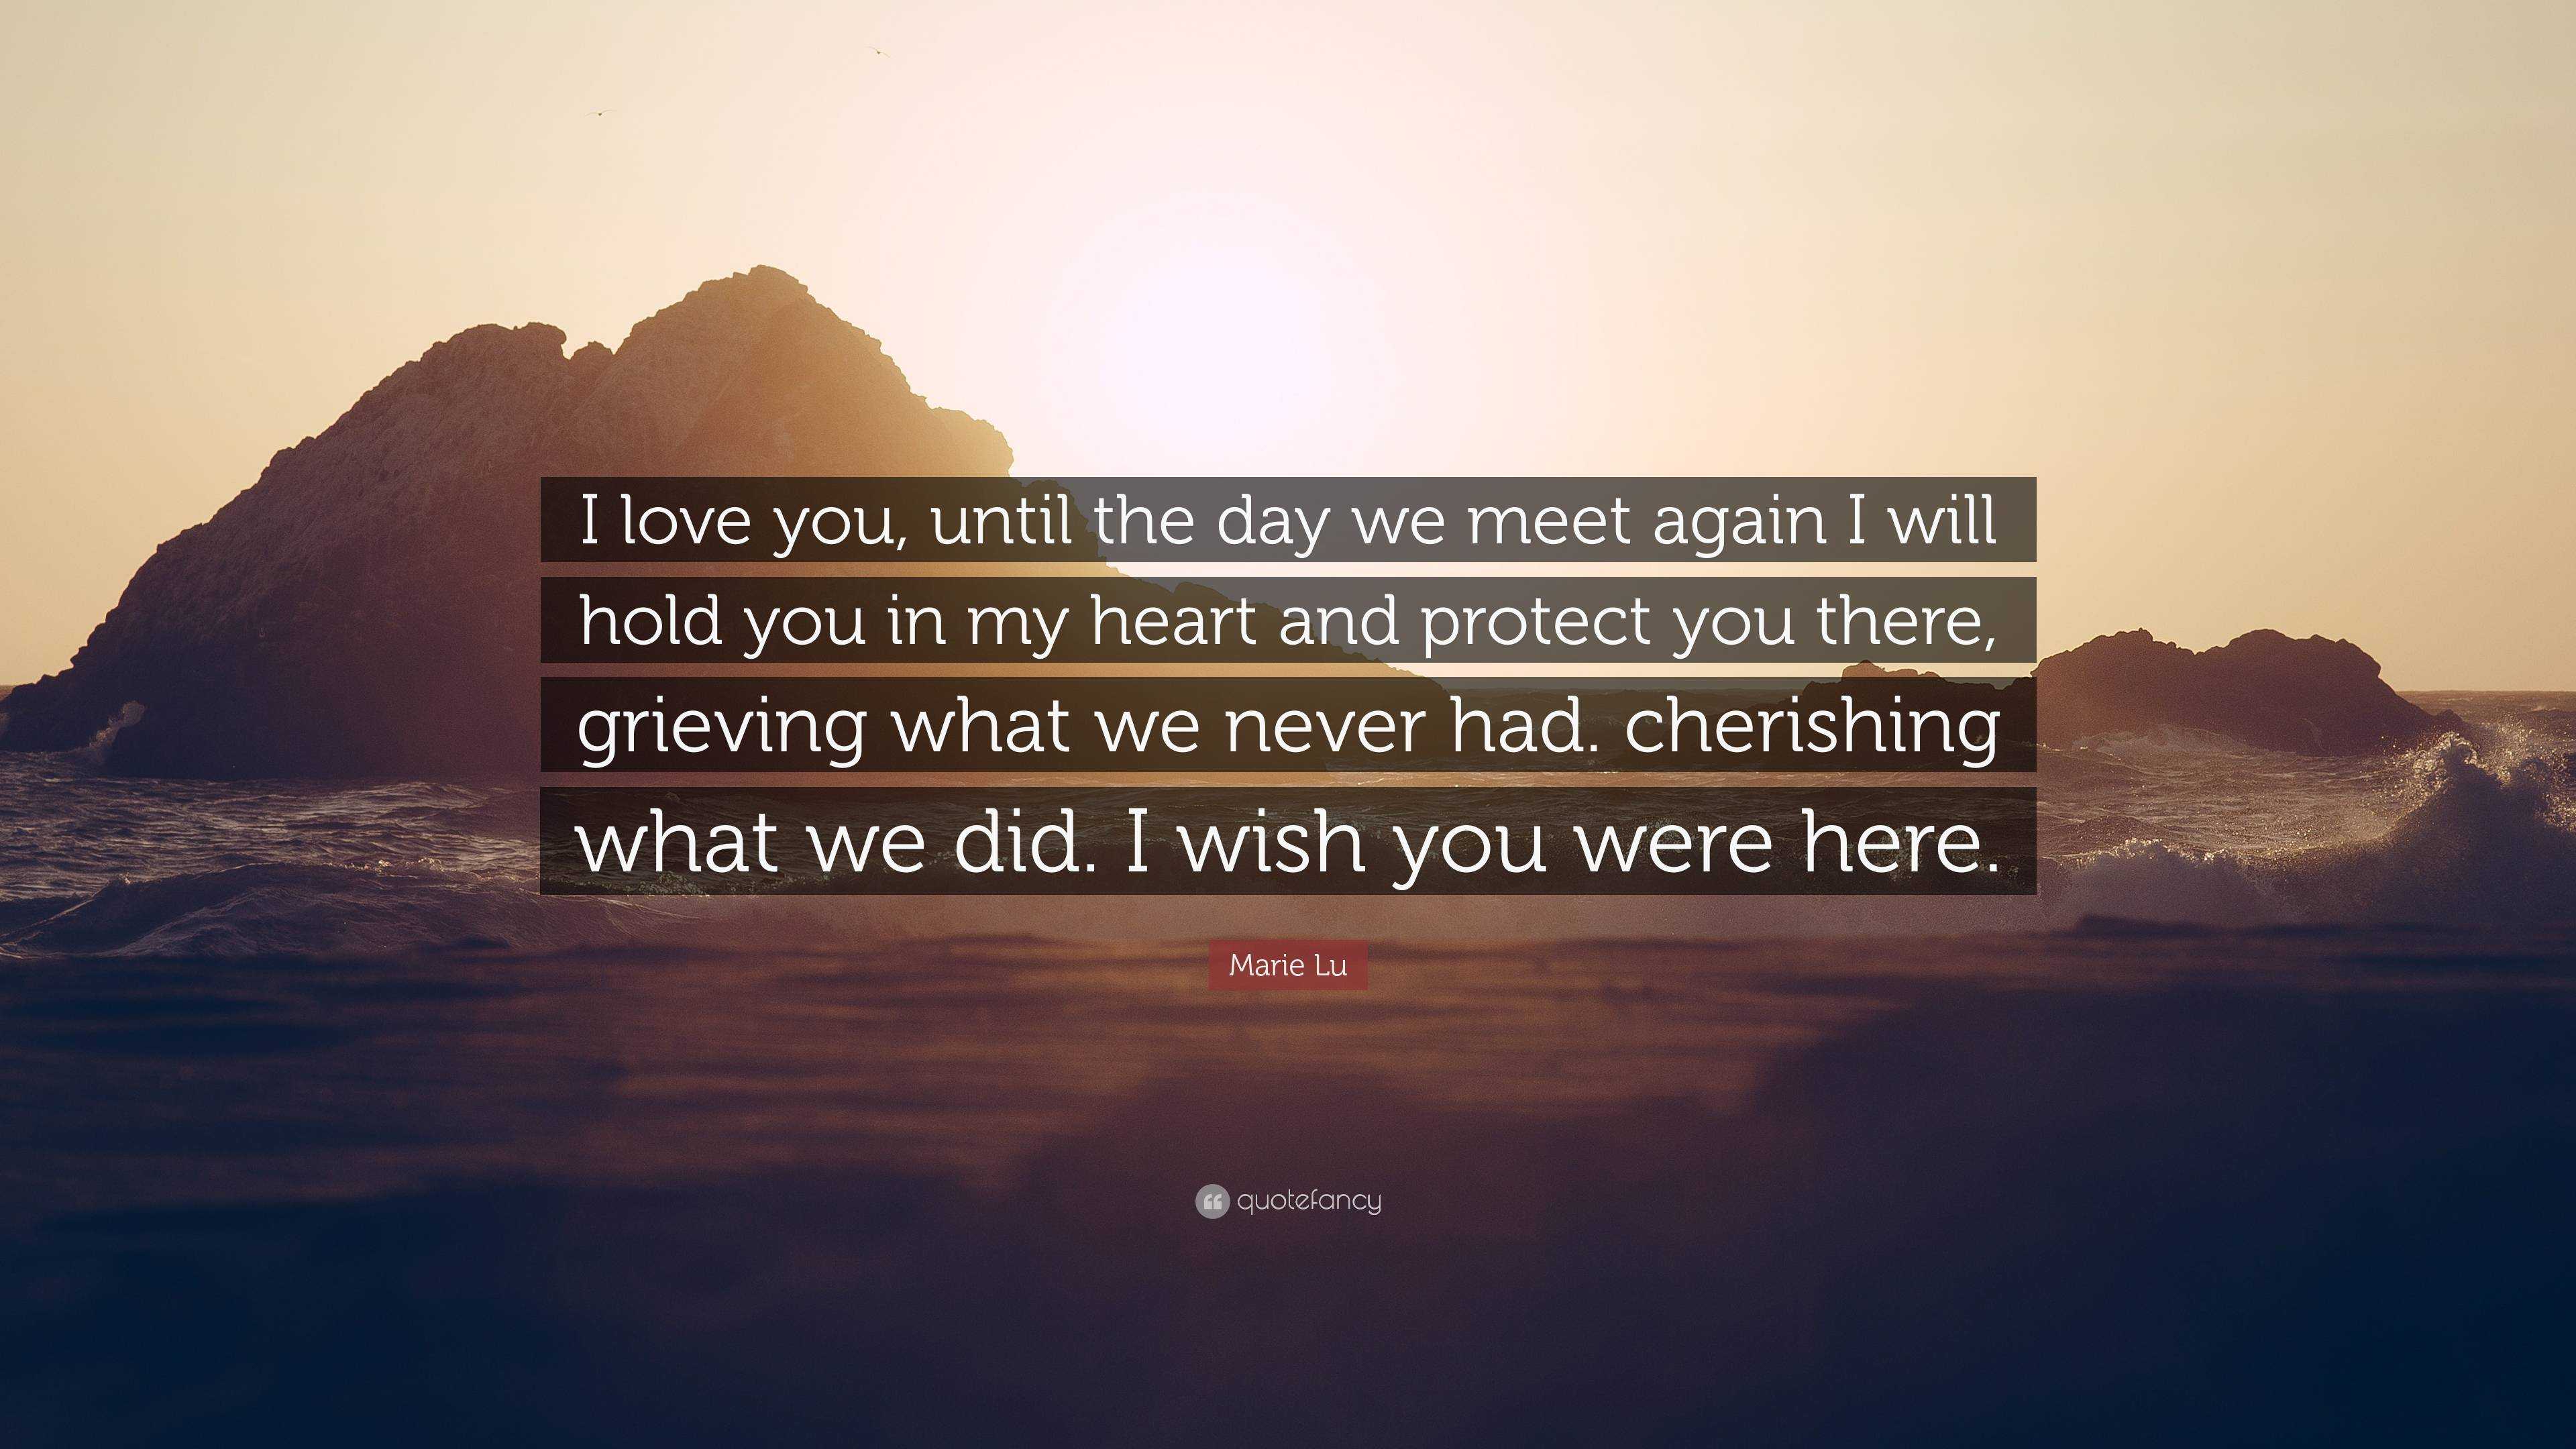 until we meet again quotes and sayings